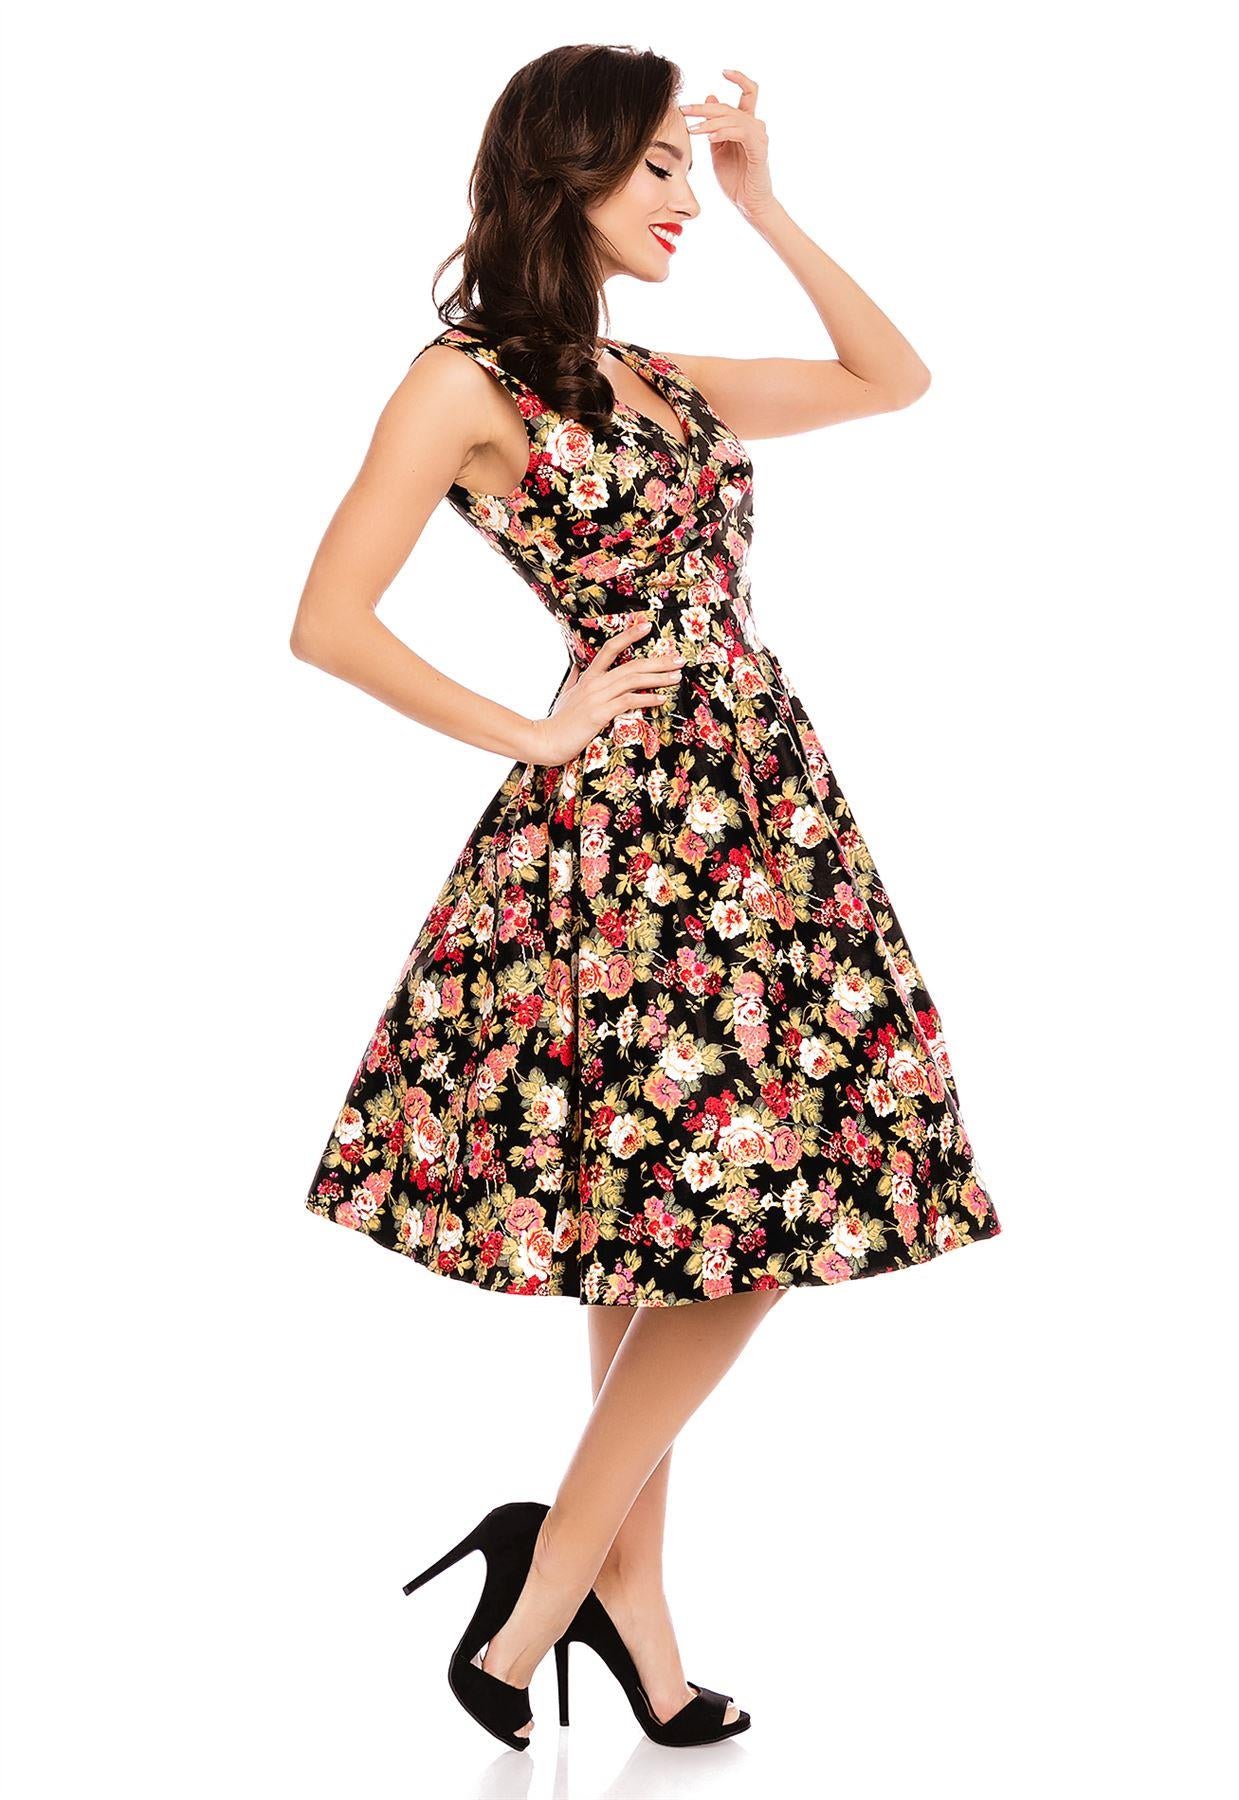 Model wearing our crossover bust May dress, in black/pink floral print, side view